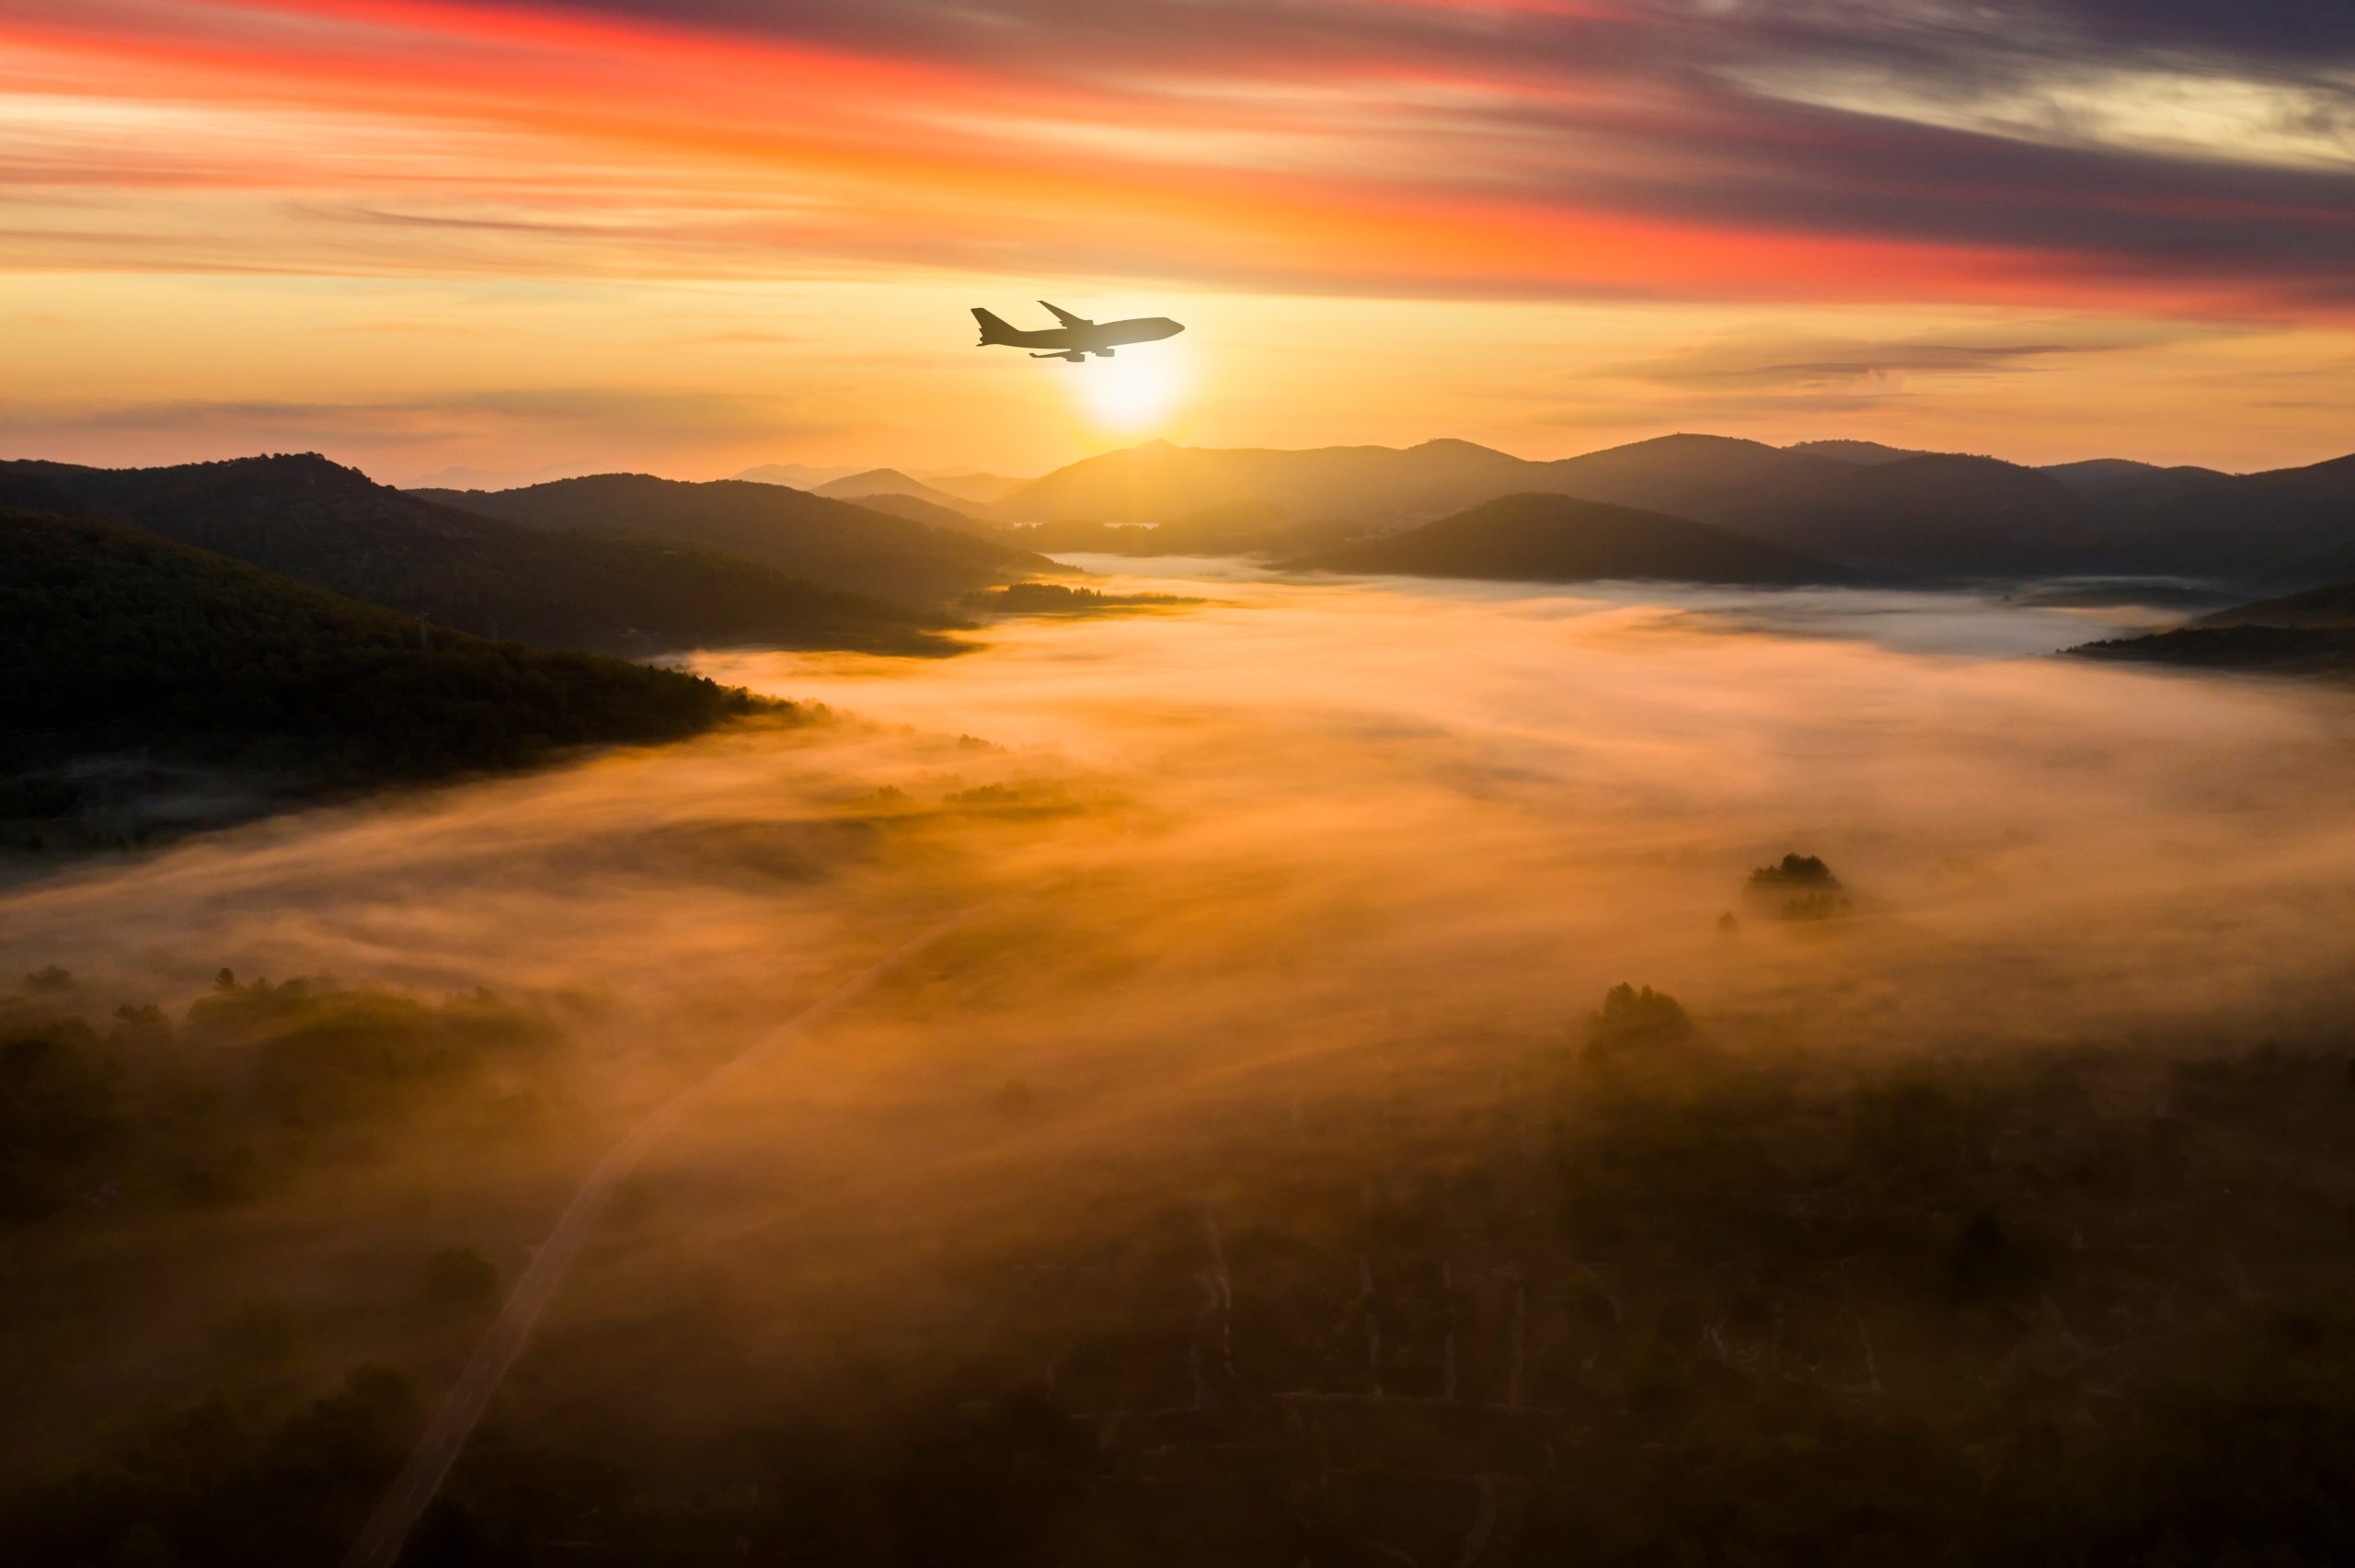 Airplane over misty mountains at dawn